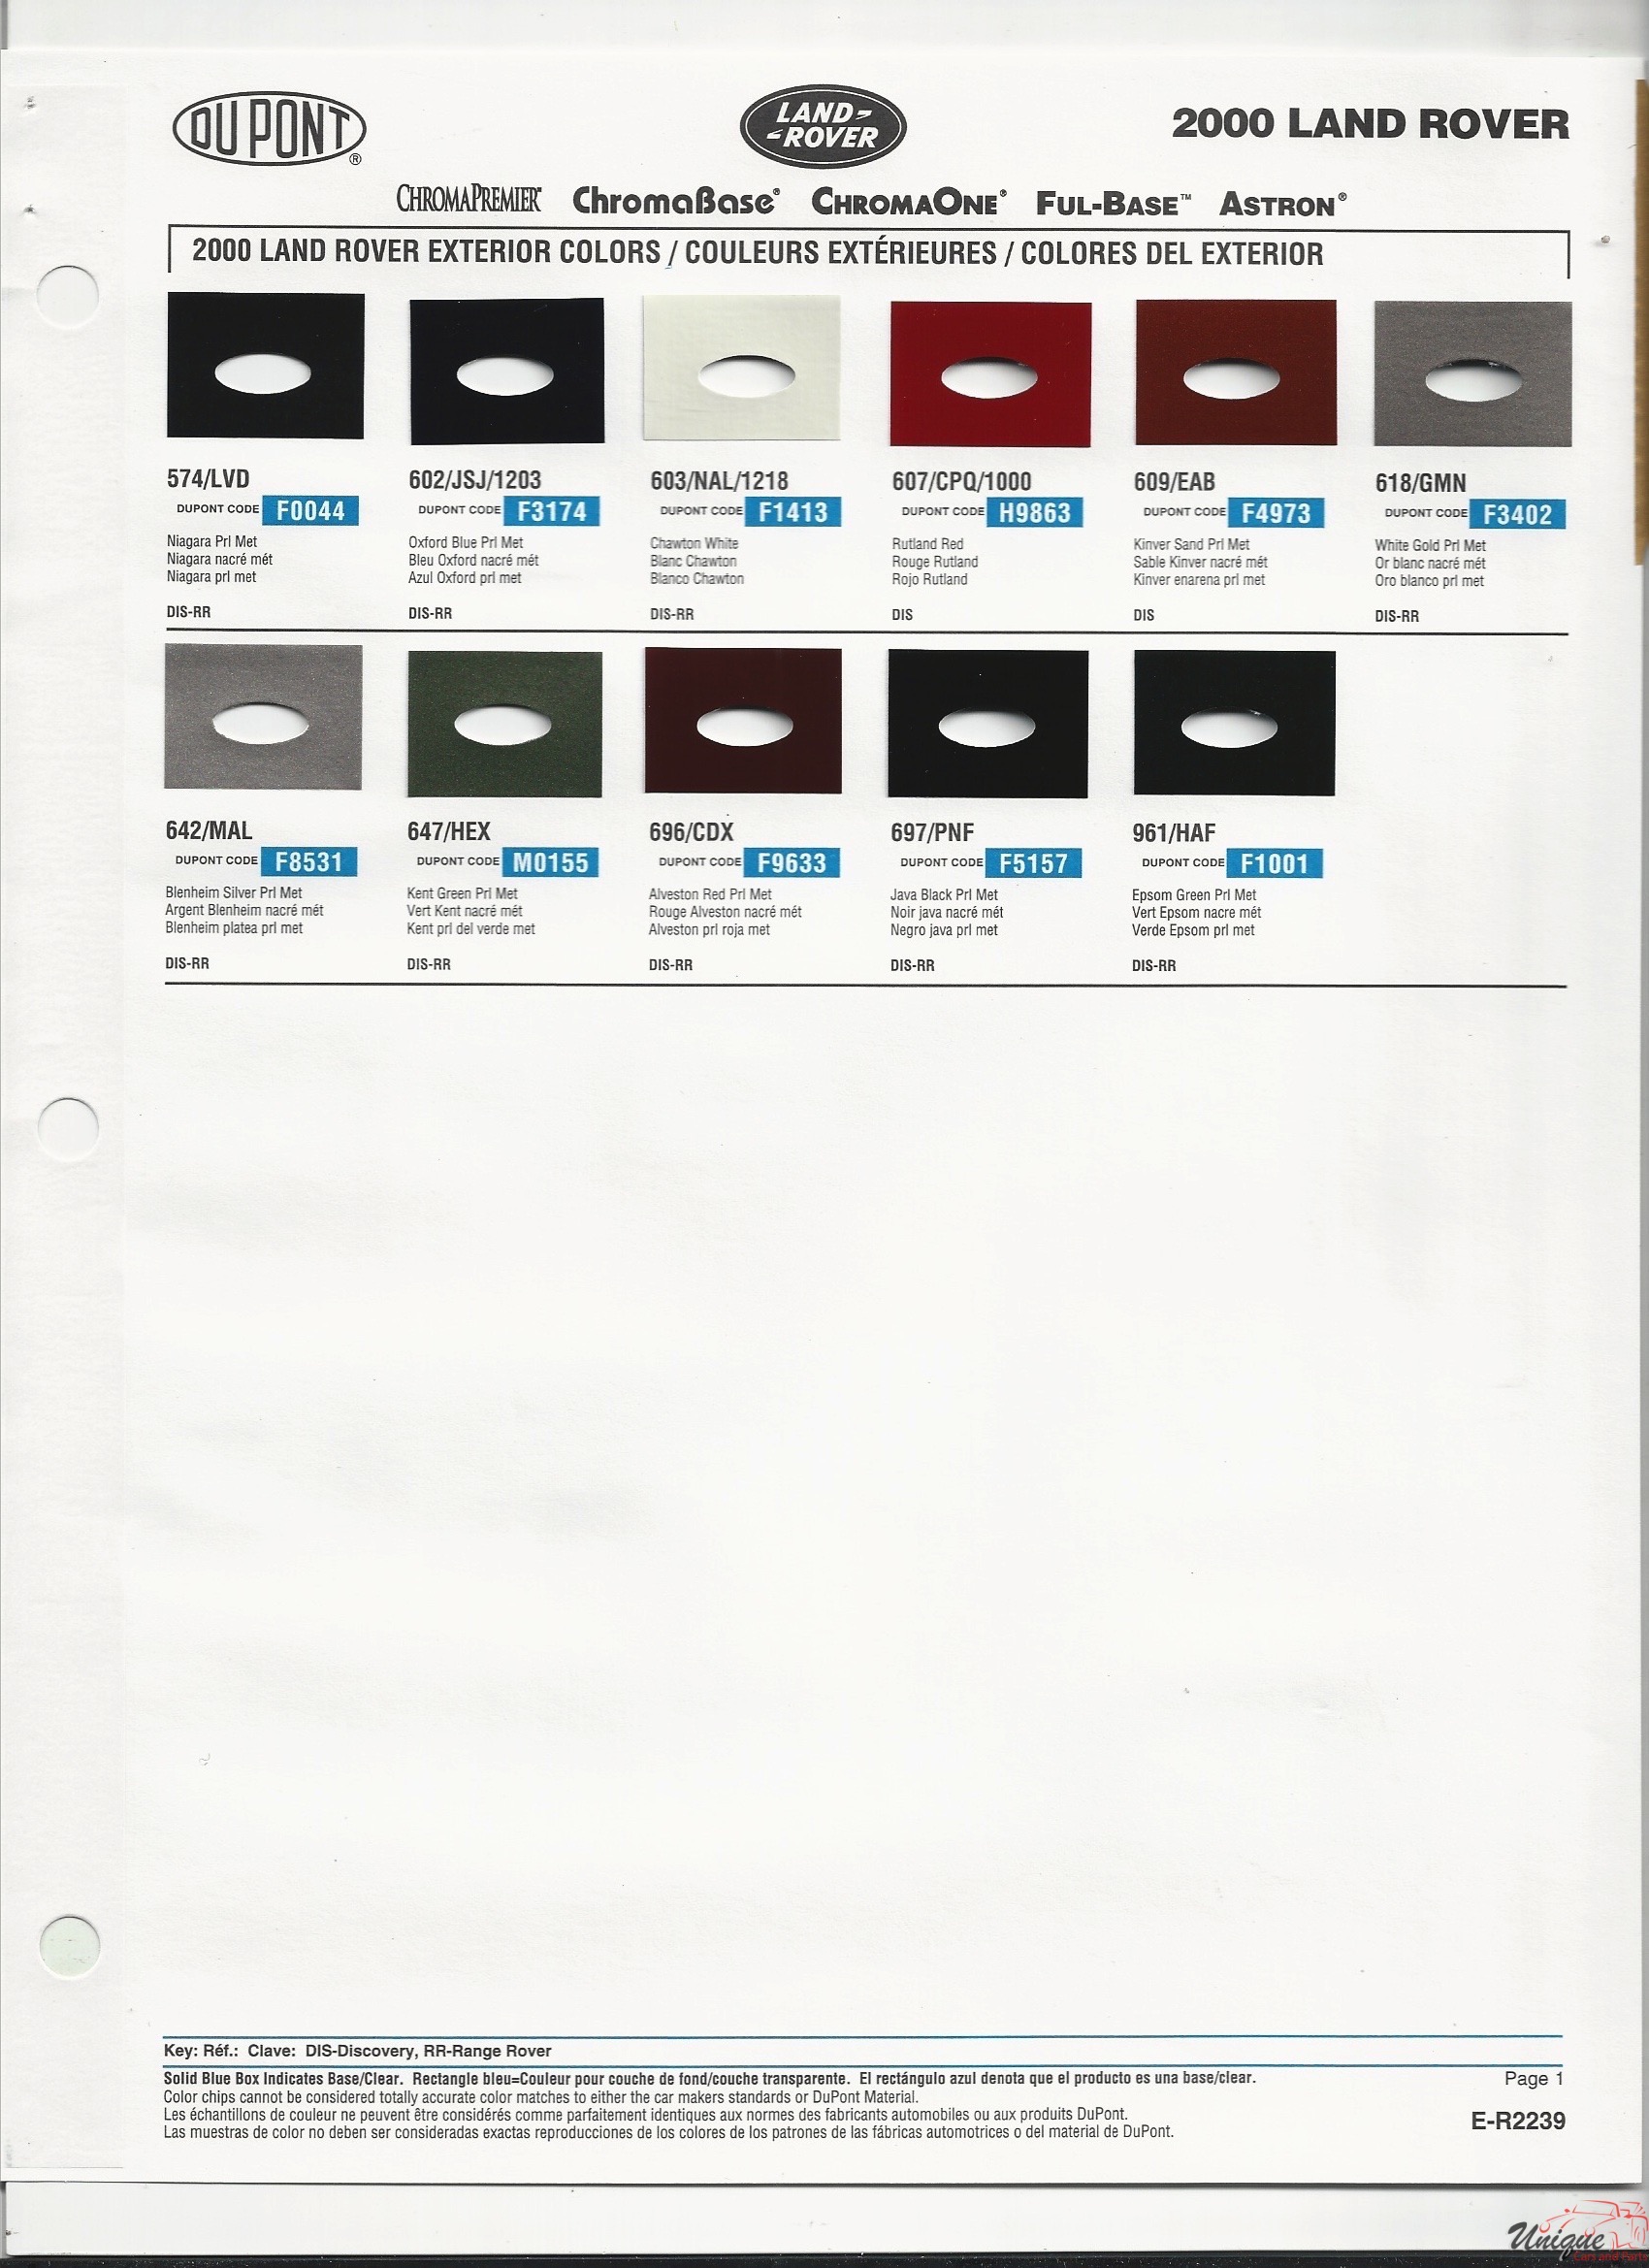 2000 Land Rover Paint Charts